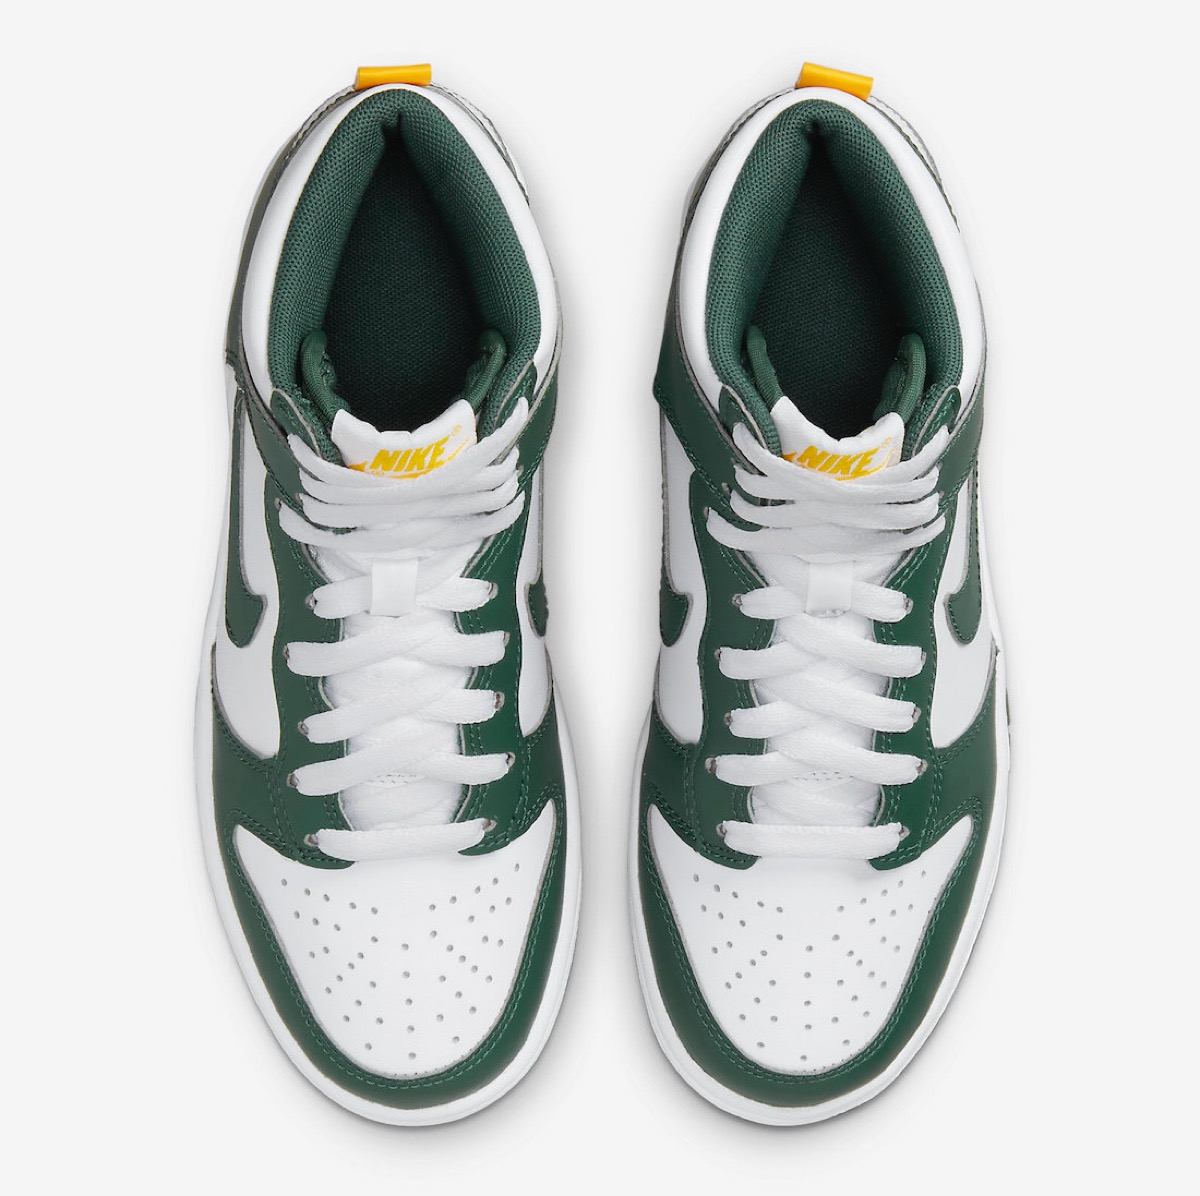 Nike Dunk High Retro “Noble Green”が国内5月26日に発売予定 | UP TO DATE